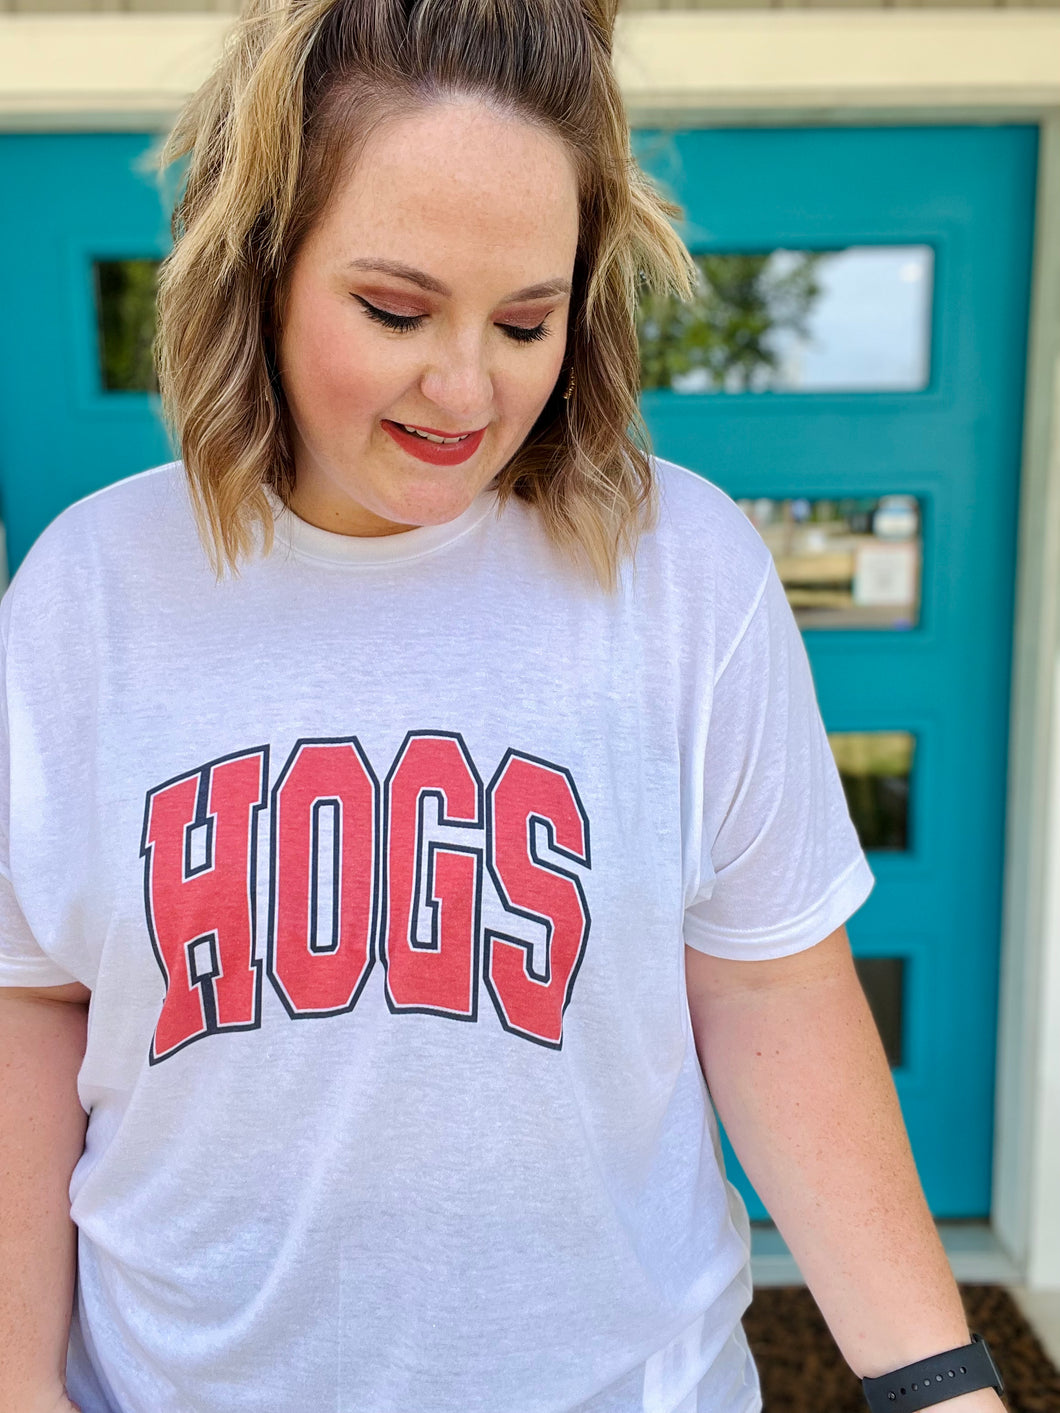 Hogs Graphic Tee on White